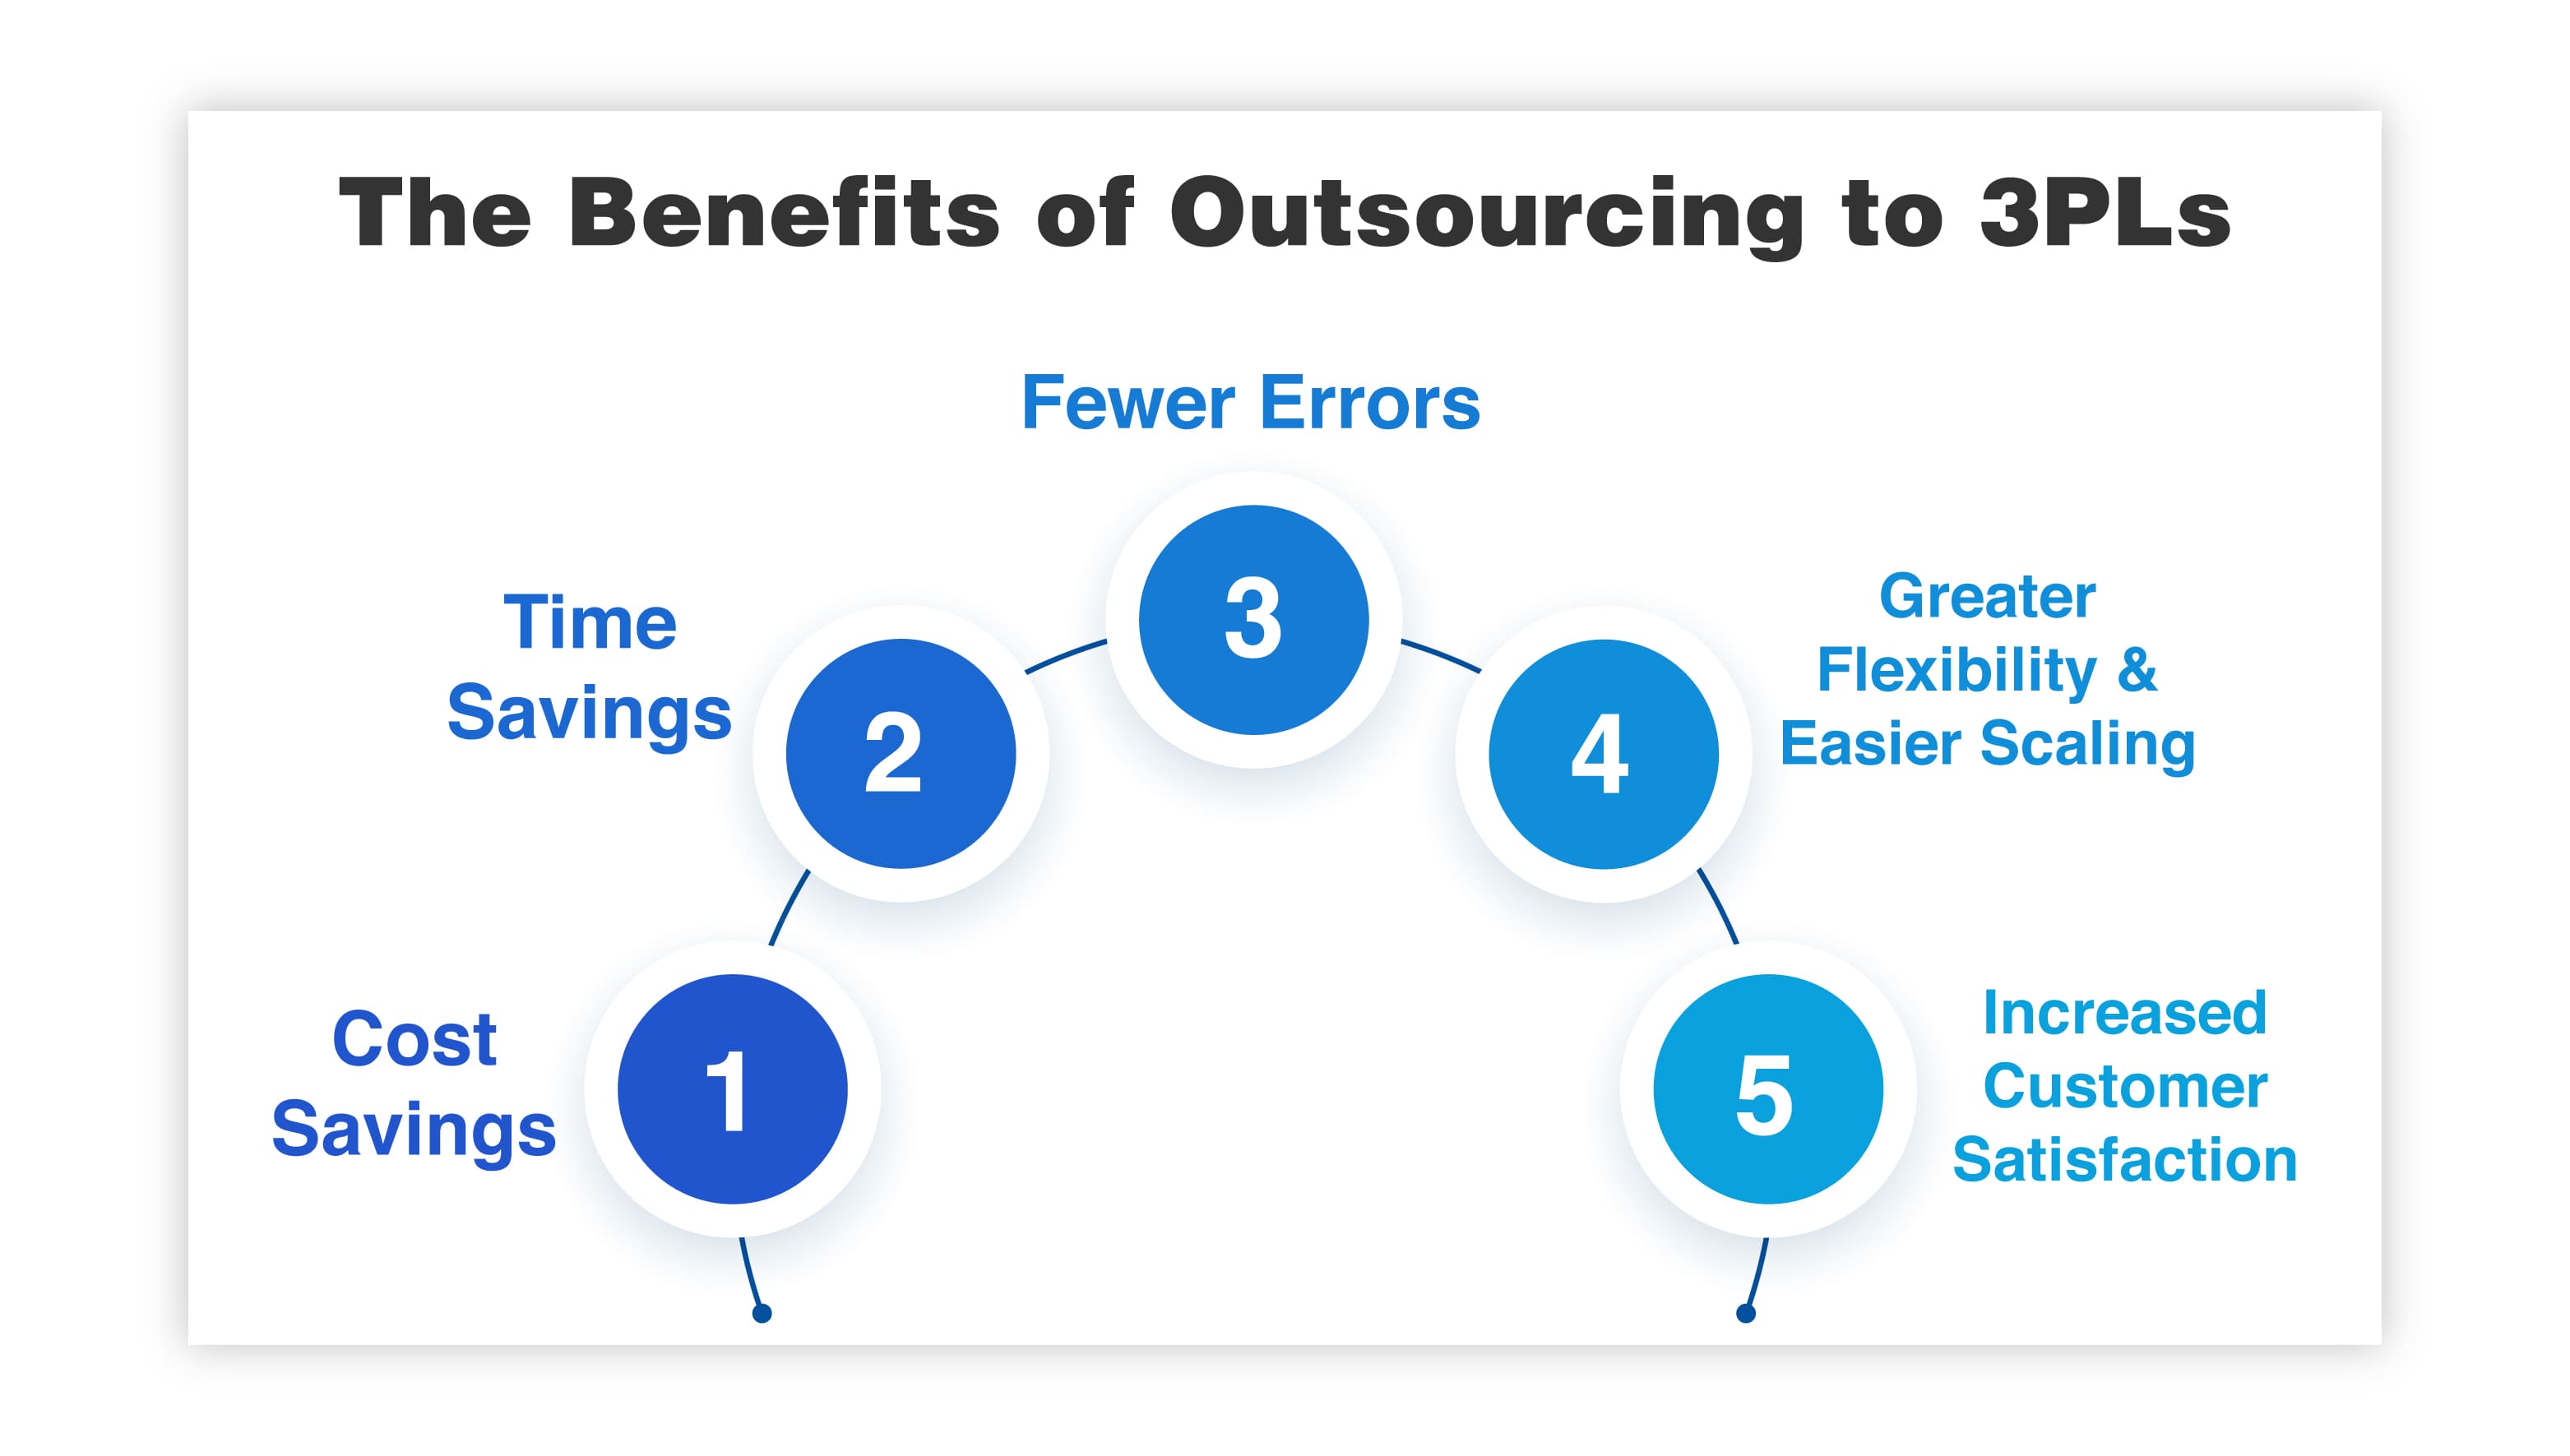 The Benefits of Outsourcing to 3PLs